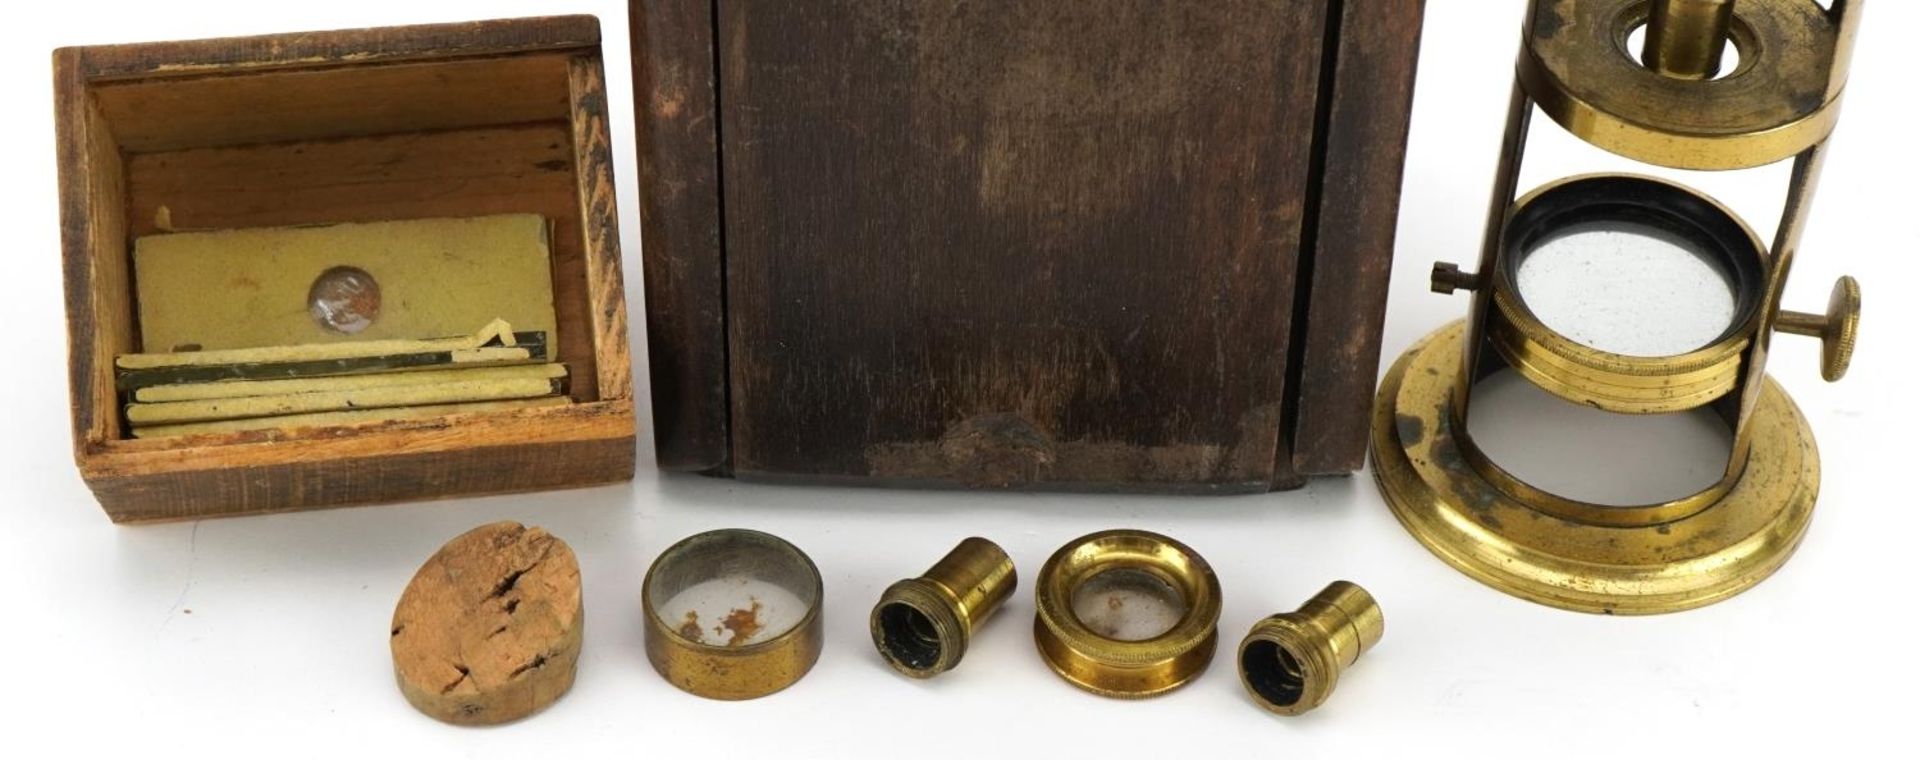 19th century brass student's microscope with case and accessories, 20.5cm high - Bild 5 aus 5